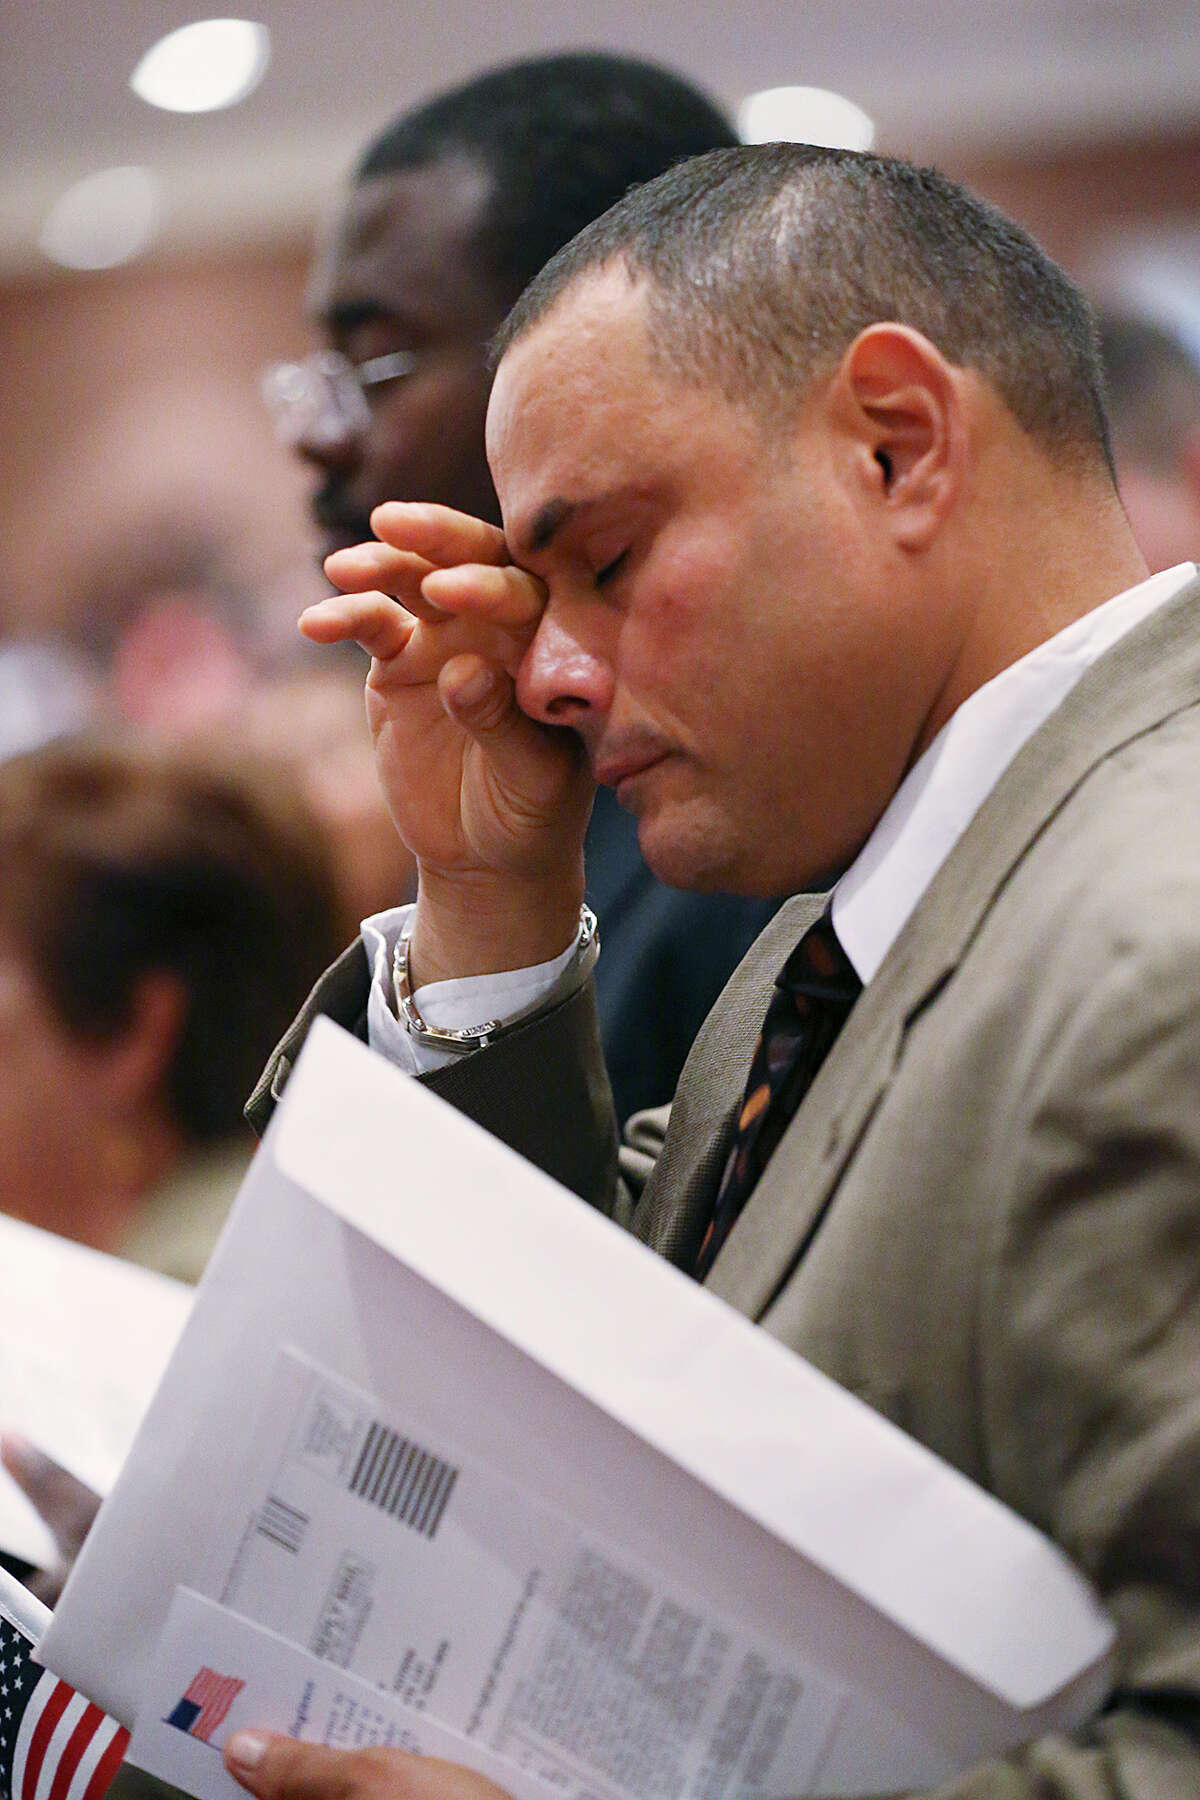 Francisco Moreno, 48, of Venezuela, reacts during one of two naturalization ceremonies held by the U.S. Citizens and Immigration Services at the Edgewood Theatre of Performing Arts for a naturalization ceremony, Thursday, August 20, 2015. A total of 994 new citizens took the Oath of Allegiance given U.S. Magistrate Judge John W. Primomo. U.S. Congressman Joaquin Castro was the main speaker at the first event.